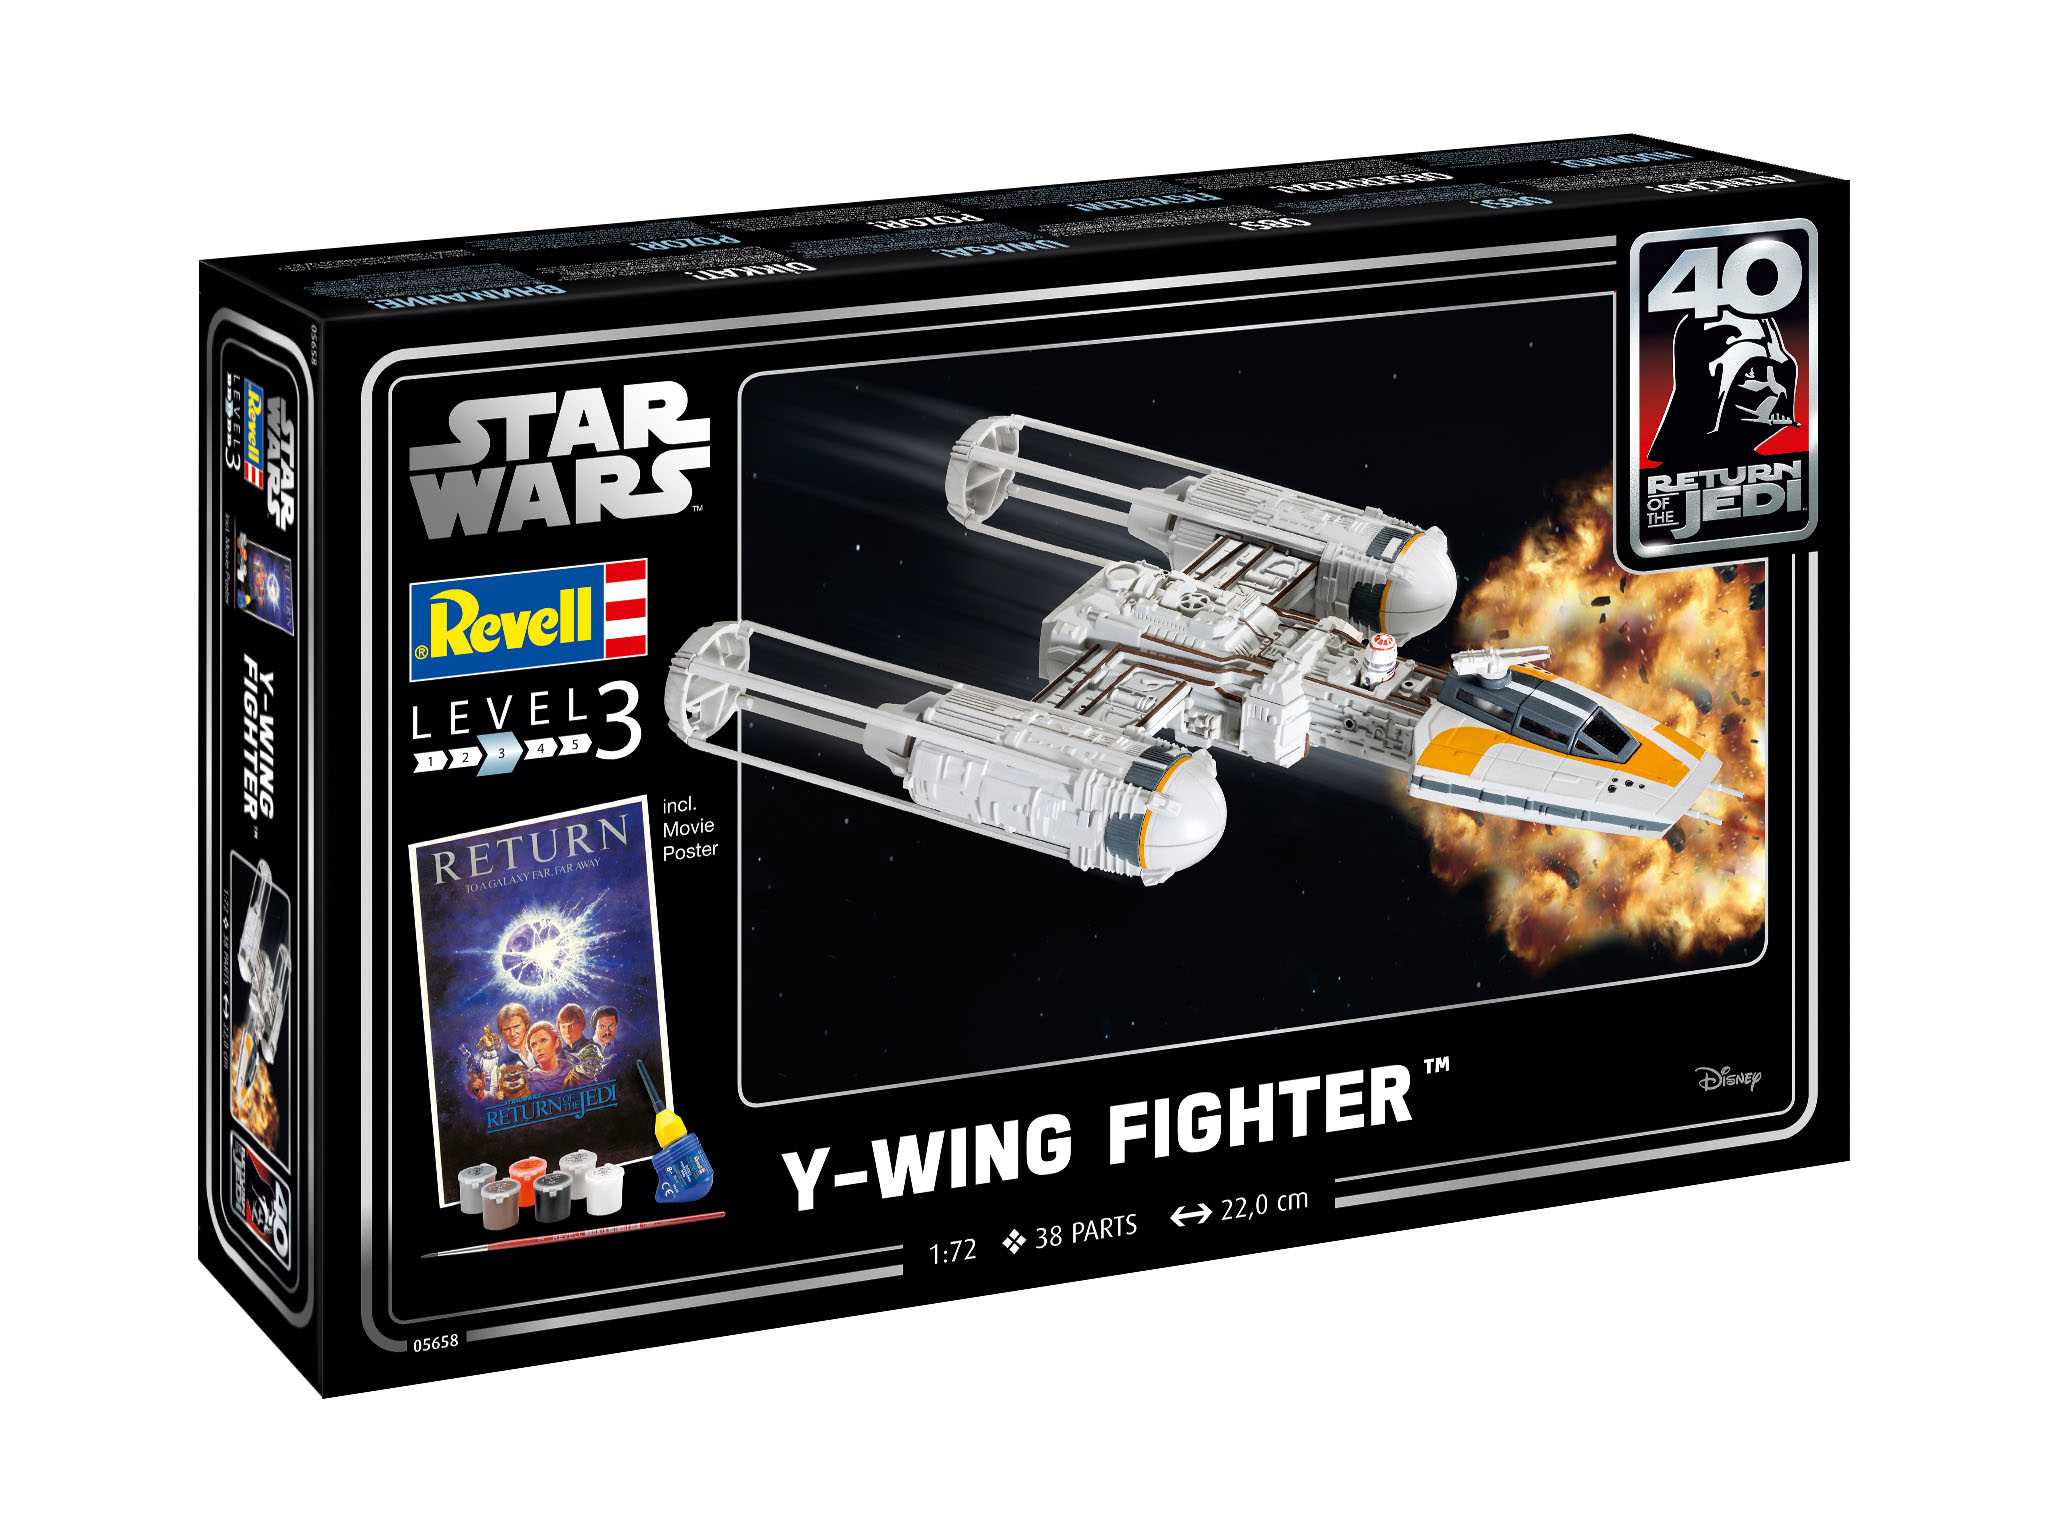 Y-wing Fighter (Revell 1:72)